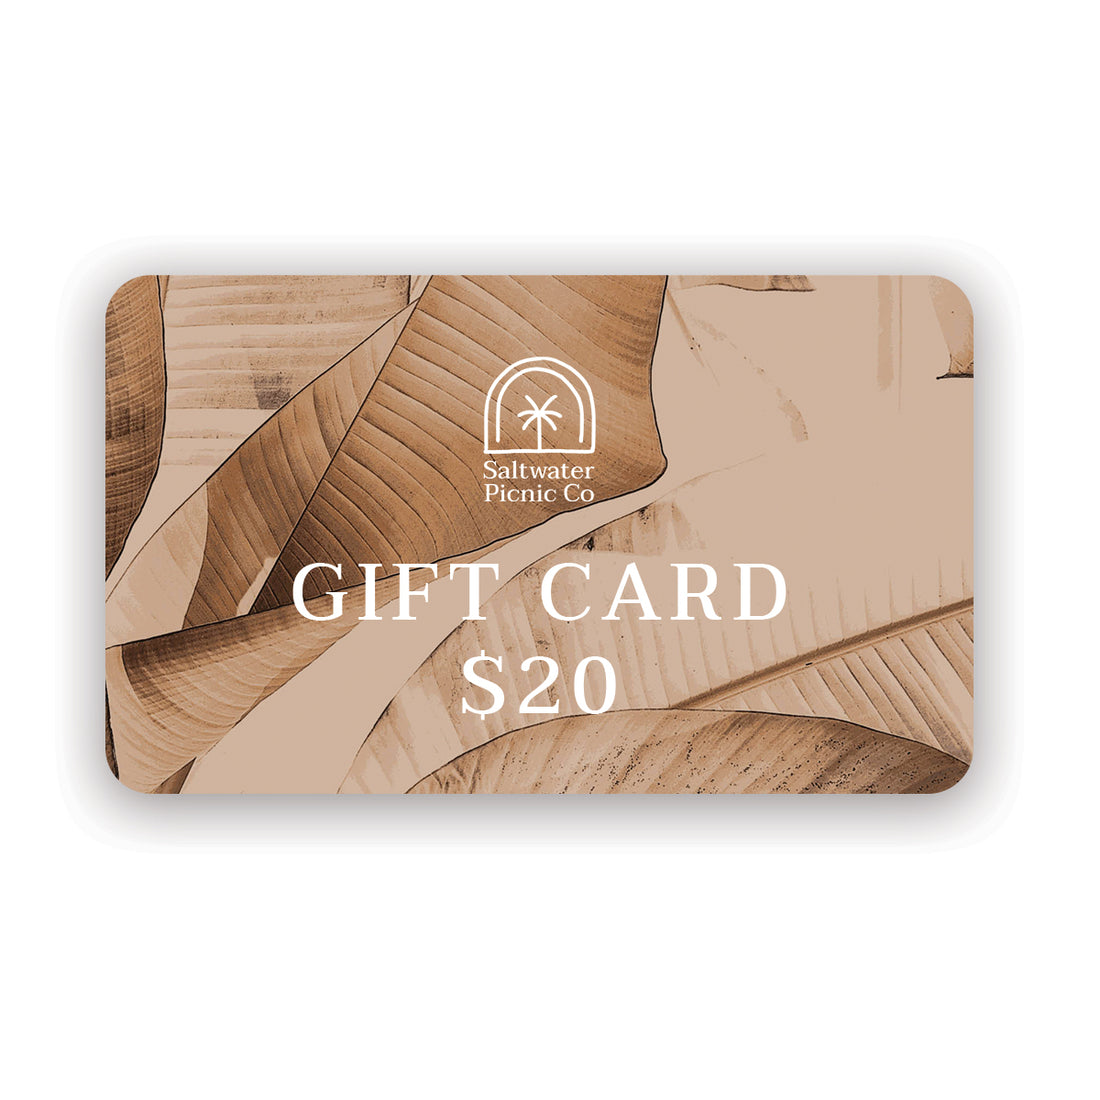 Saltwater Picnic Co. Gift Cards